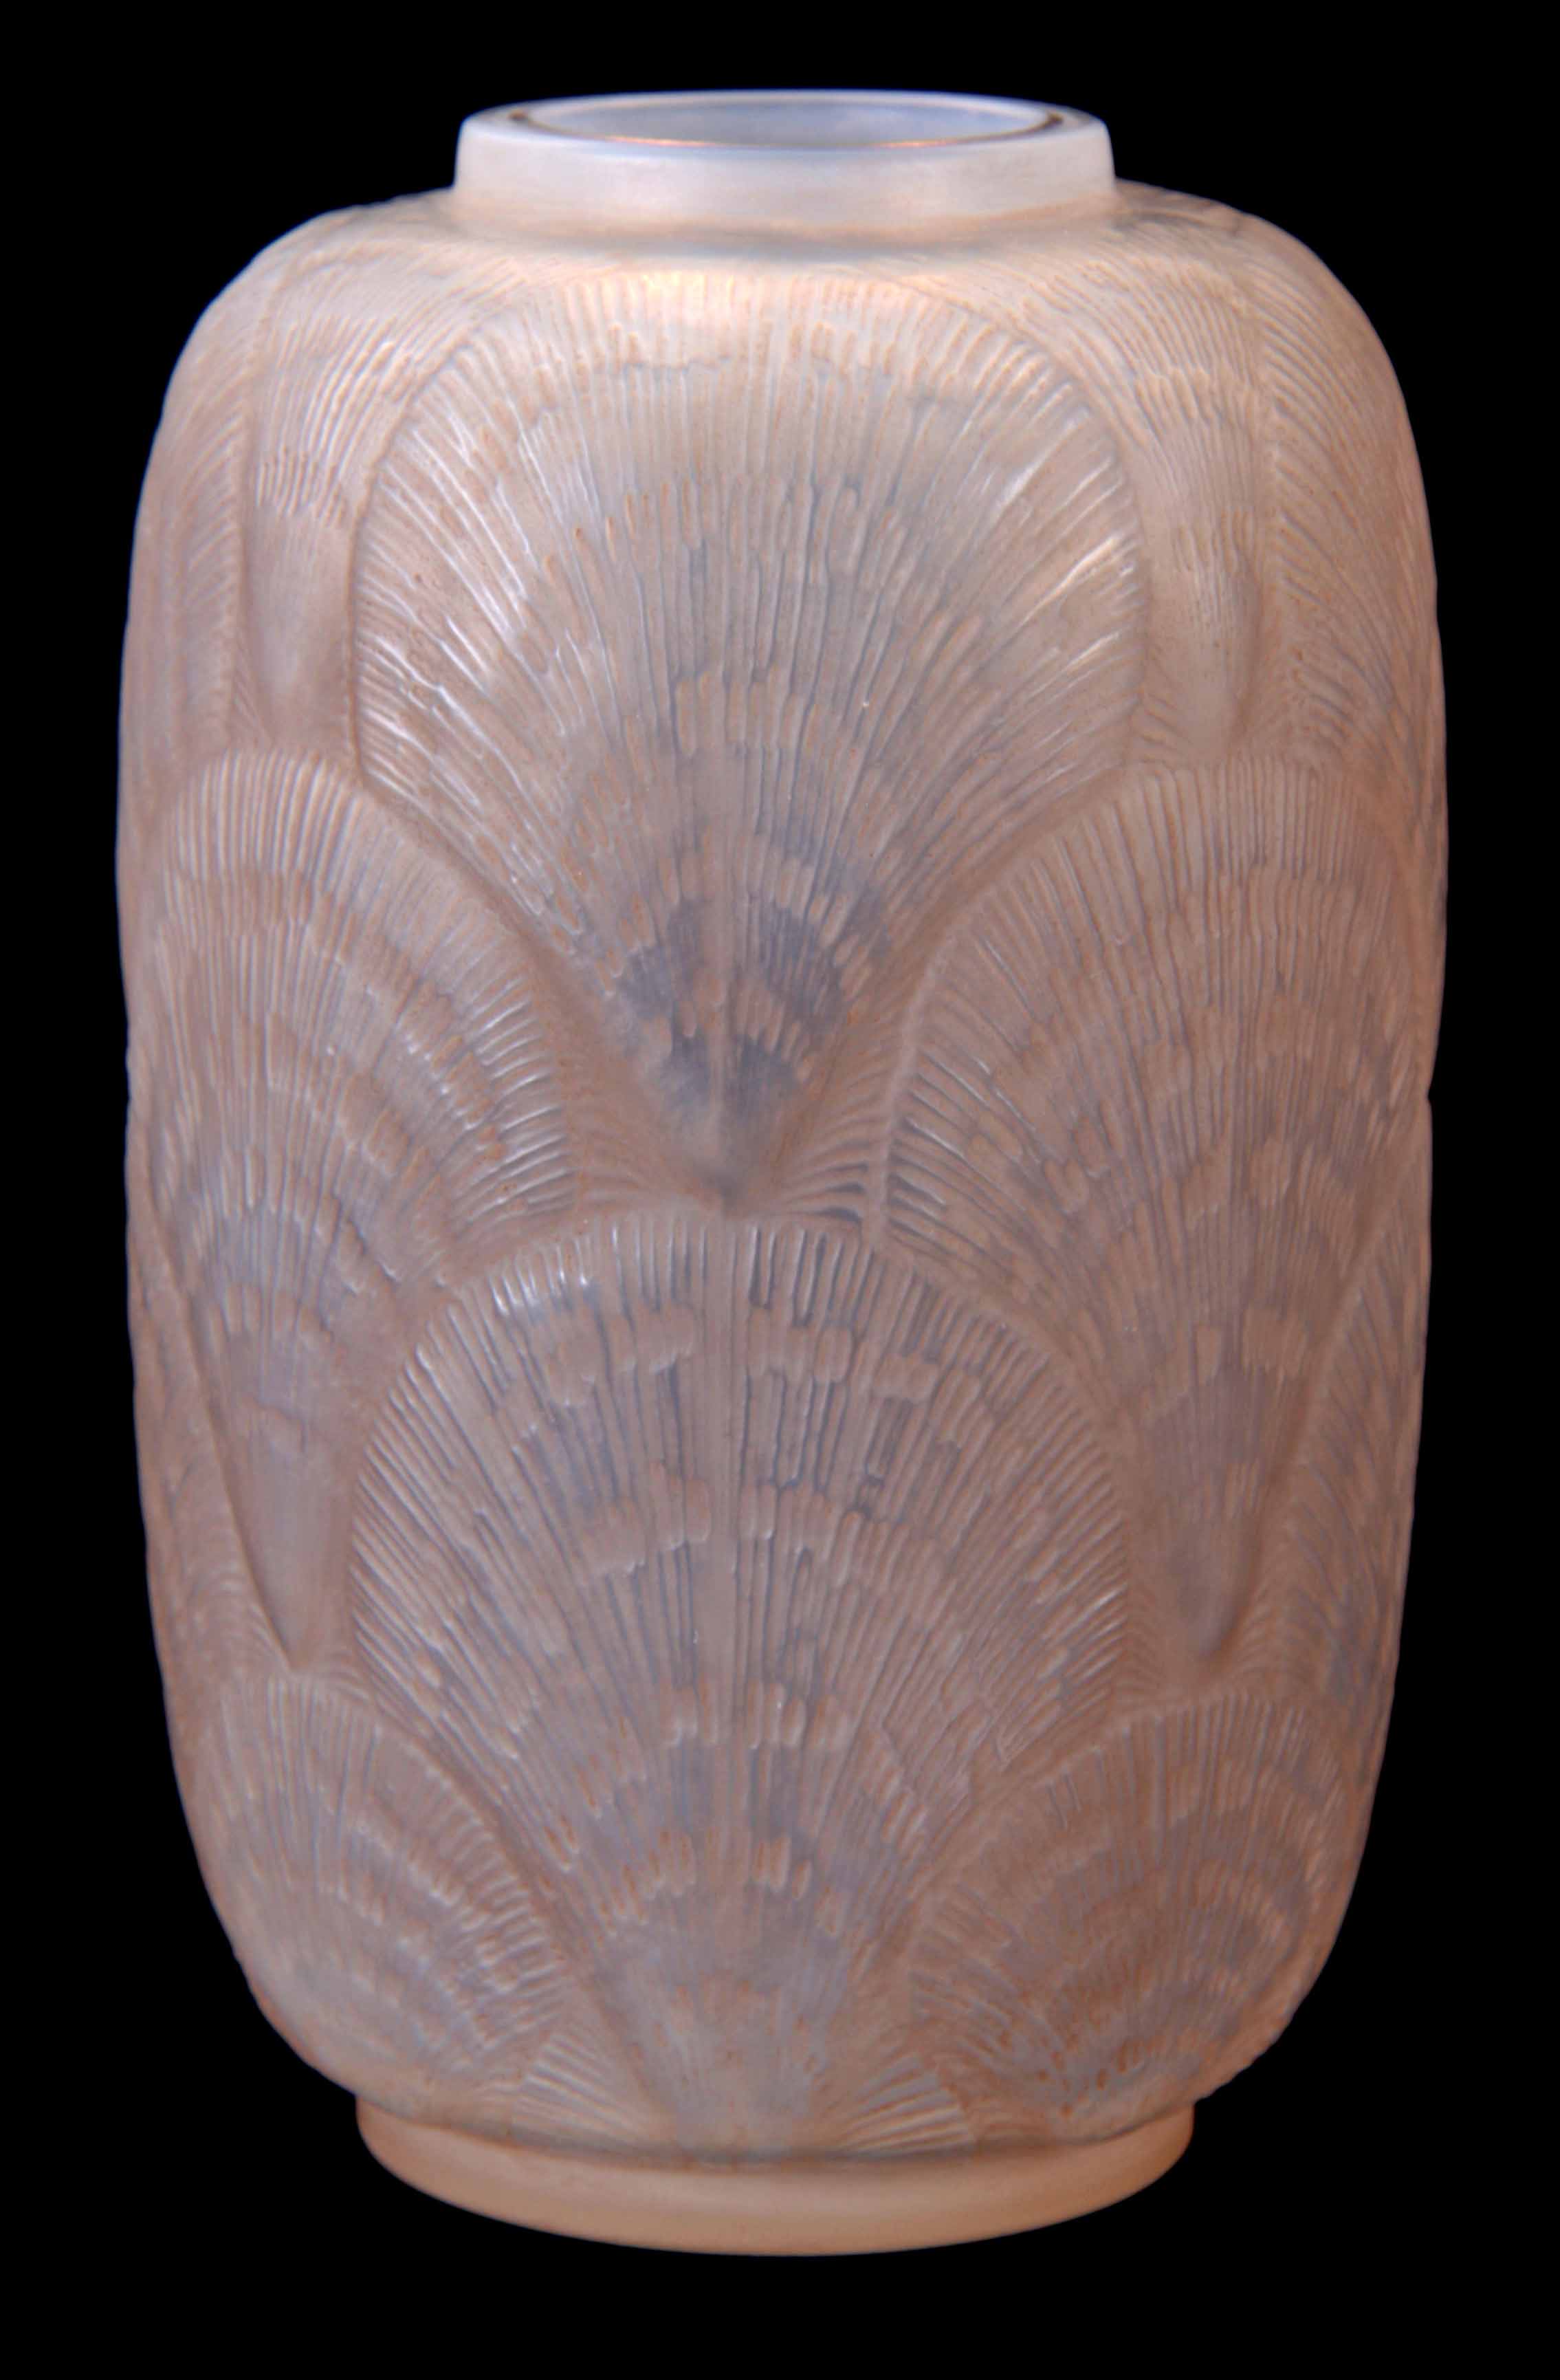 R. LALIQUE AN OPALESCENT COQUILLES VASE highlighted with blue staining - engraved signature R.